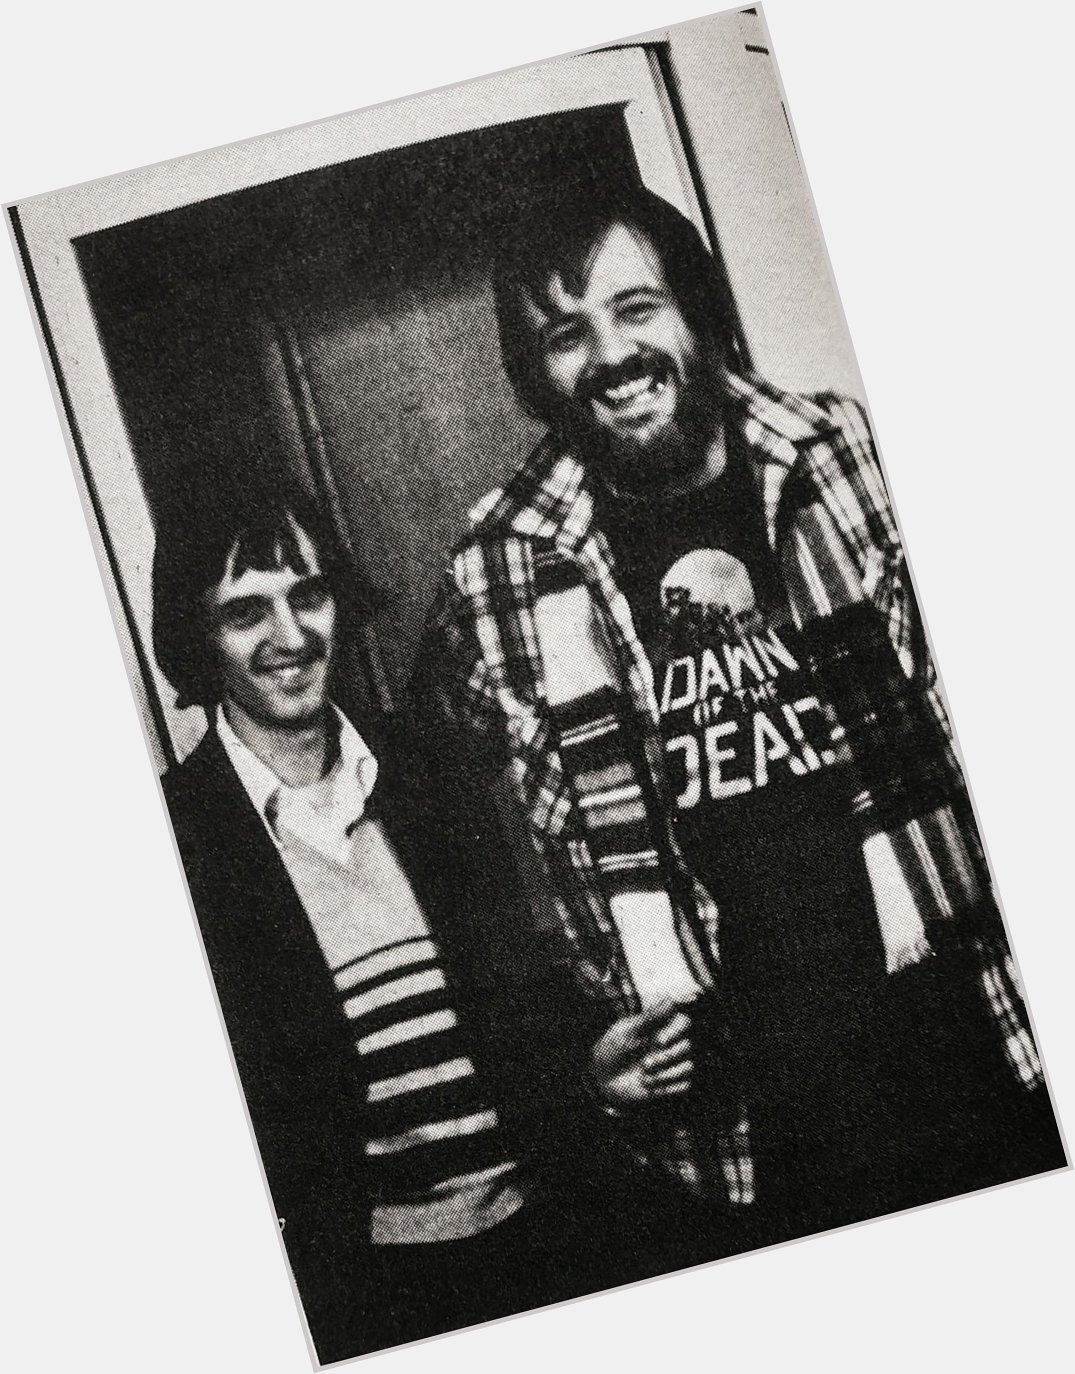 Happy Birthday to Dario Argento seen here with George A. Romero on the set of DAWN OF THE DEAD. 